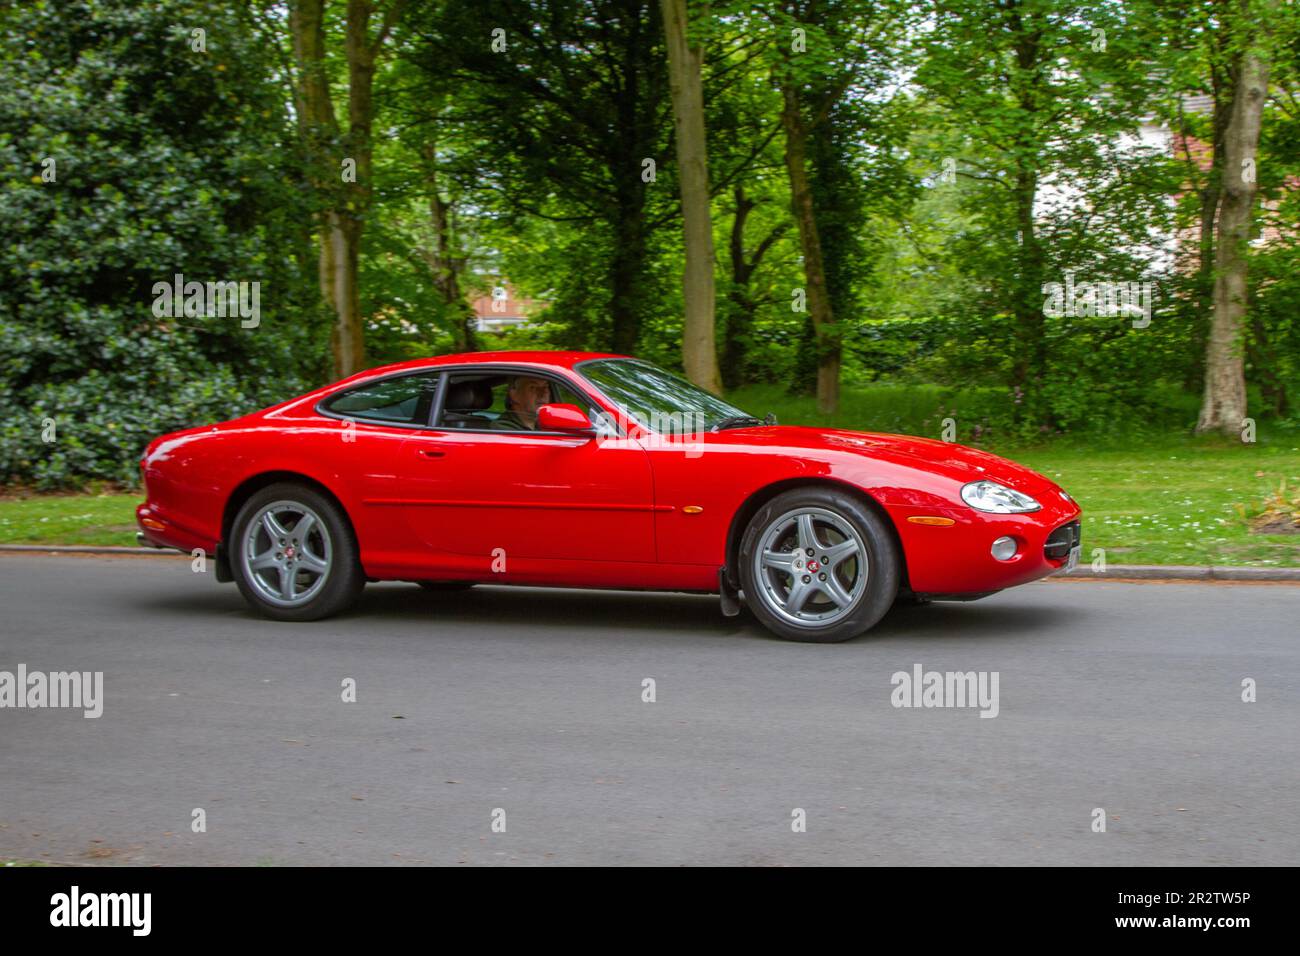 2001 Red JAGUAR XK8 Coupe 3996cc Petrol 5 speed automatic; at the Lytham St Annes Classic & Performance Motor vehicle show displays of classic cars, UK Stock Photo